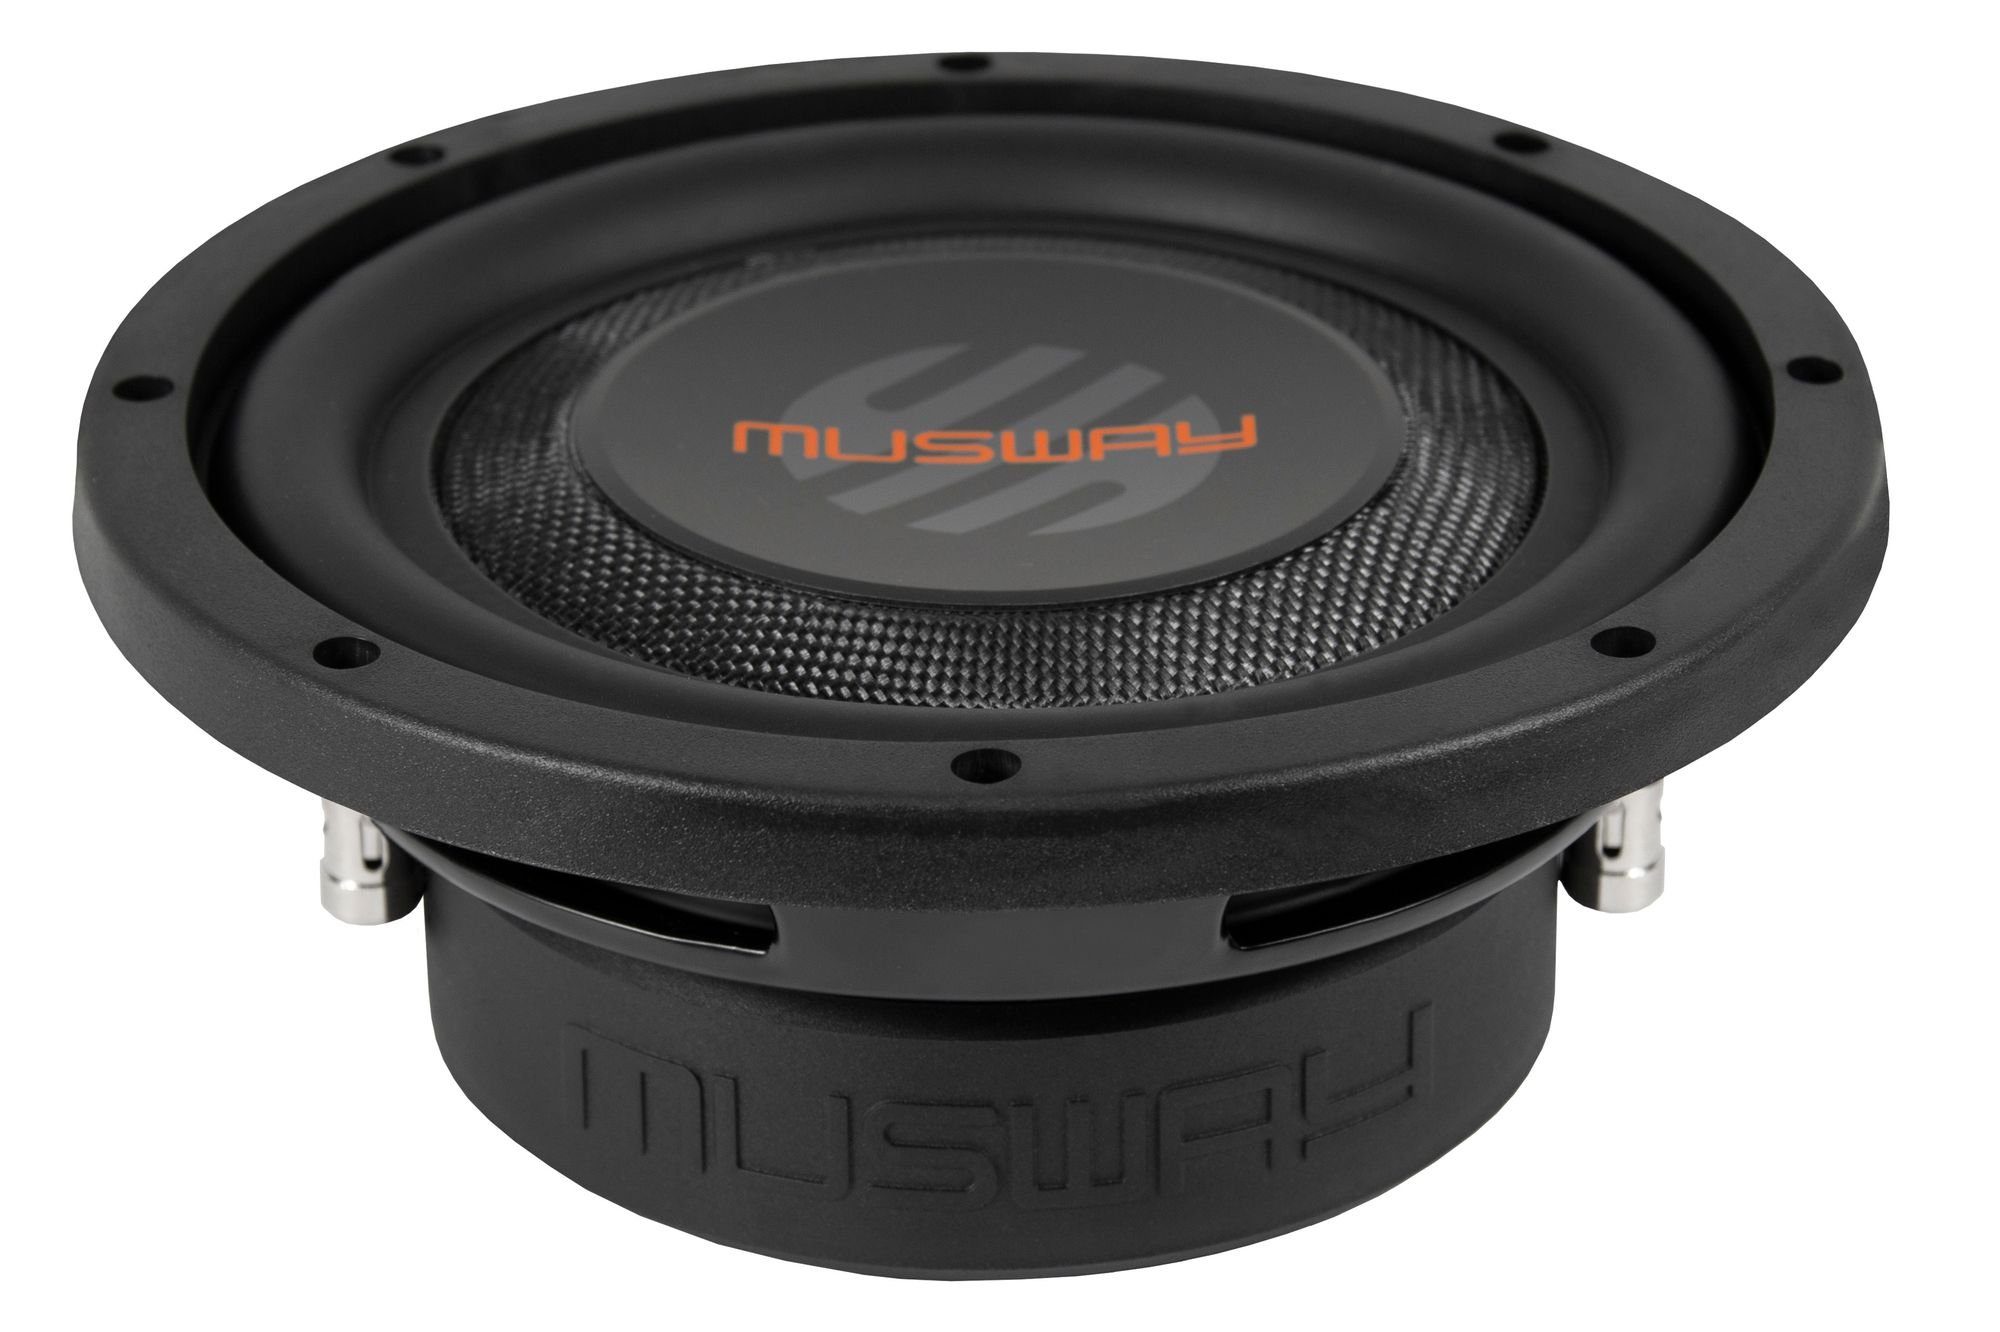 Musway MWS822 8? FLAT Subwoofer 8? (20 cm) FLACH Subwoofer Auto-Subwoofer (250 W, Musway MWS822, 8“ FLAT Subwoofer 8“ (20 cm) FLACH Subwoofer) | Auto-Subwoofer